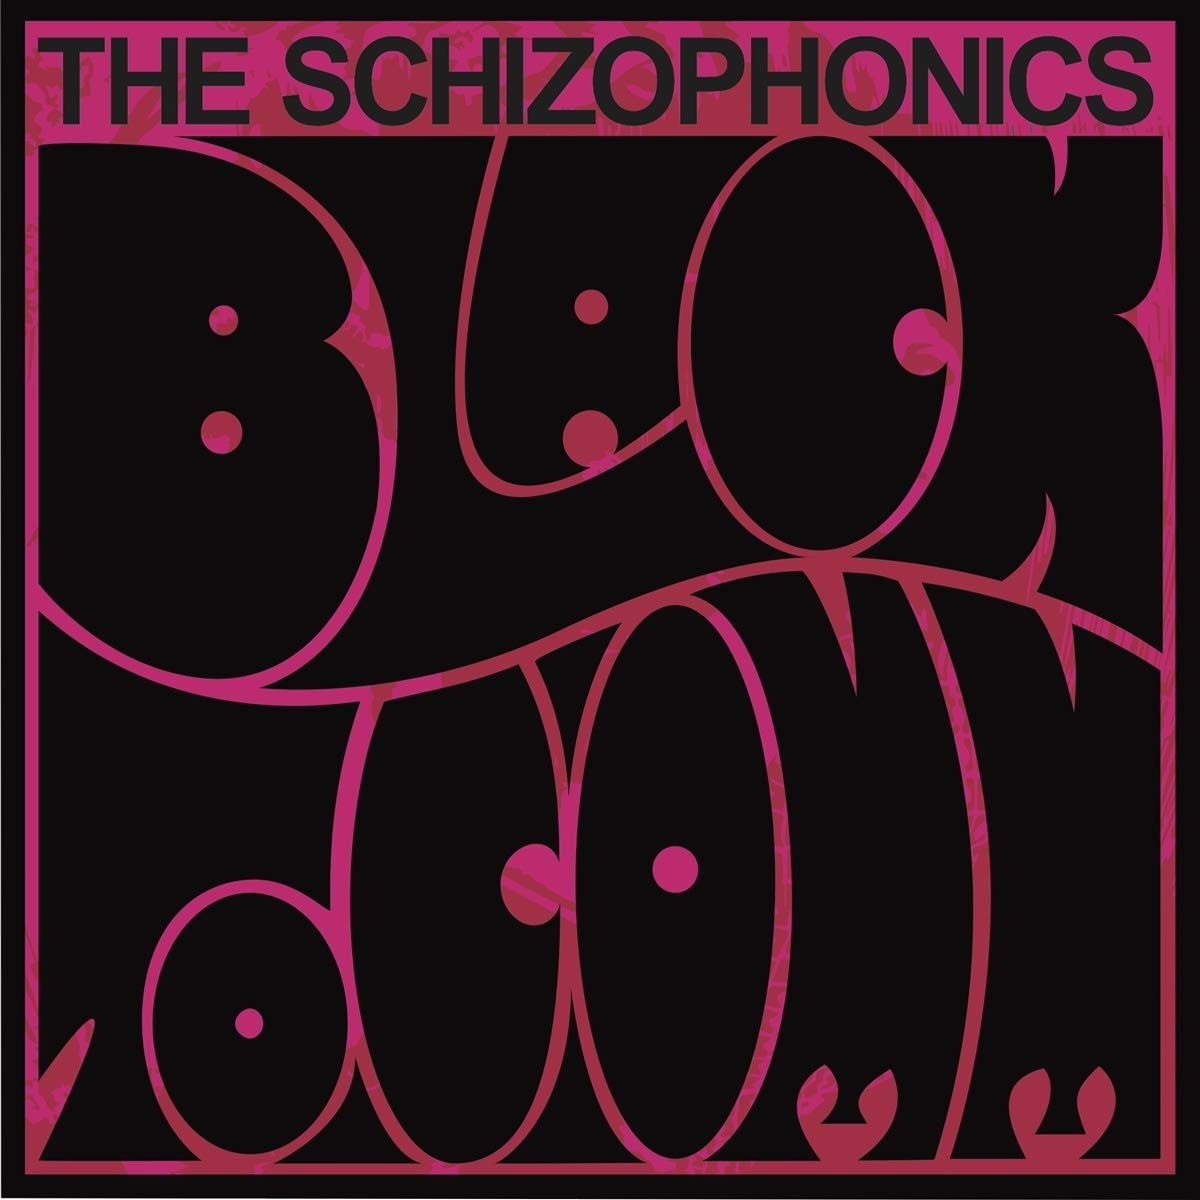 The Schizophonics - Black To Comm b/w Remake Remodel 7" (45rpm, Limited Edition, Numbered, Limited to 1000)